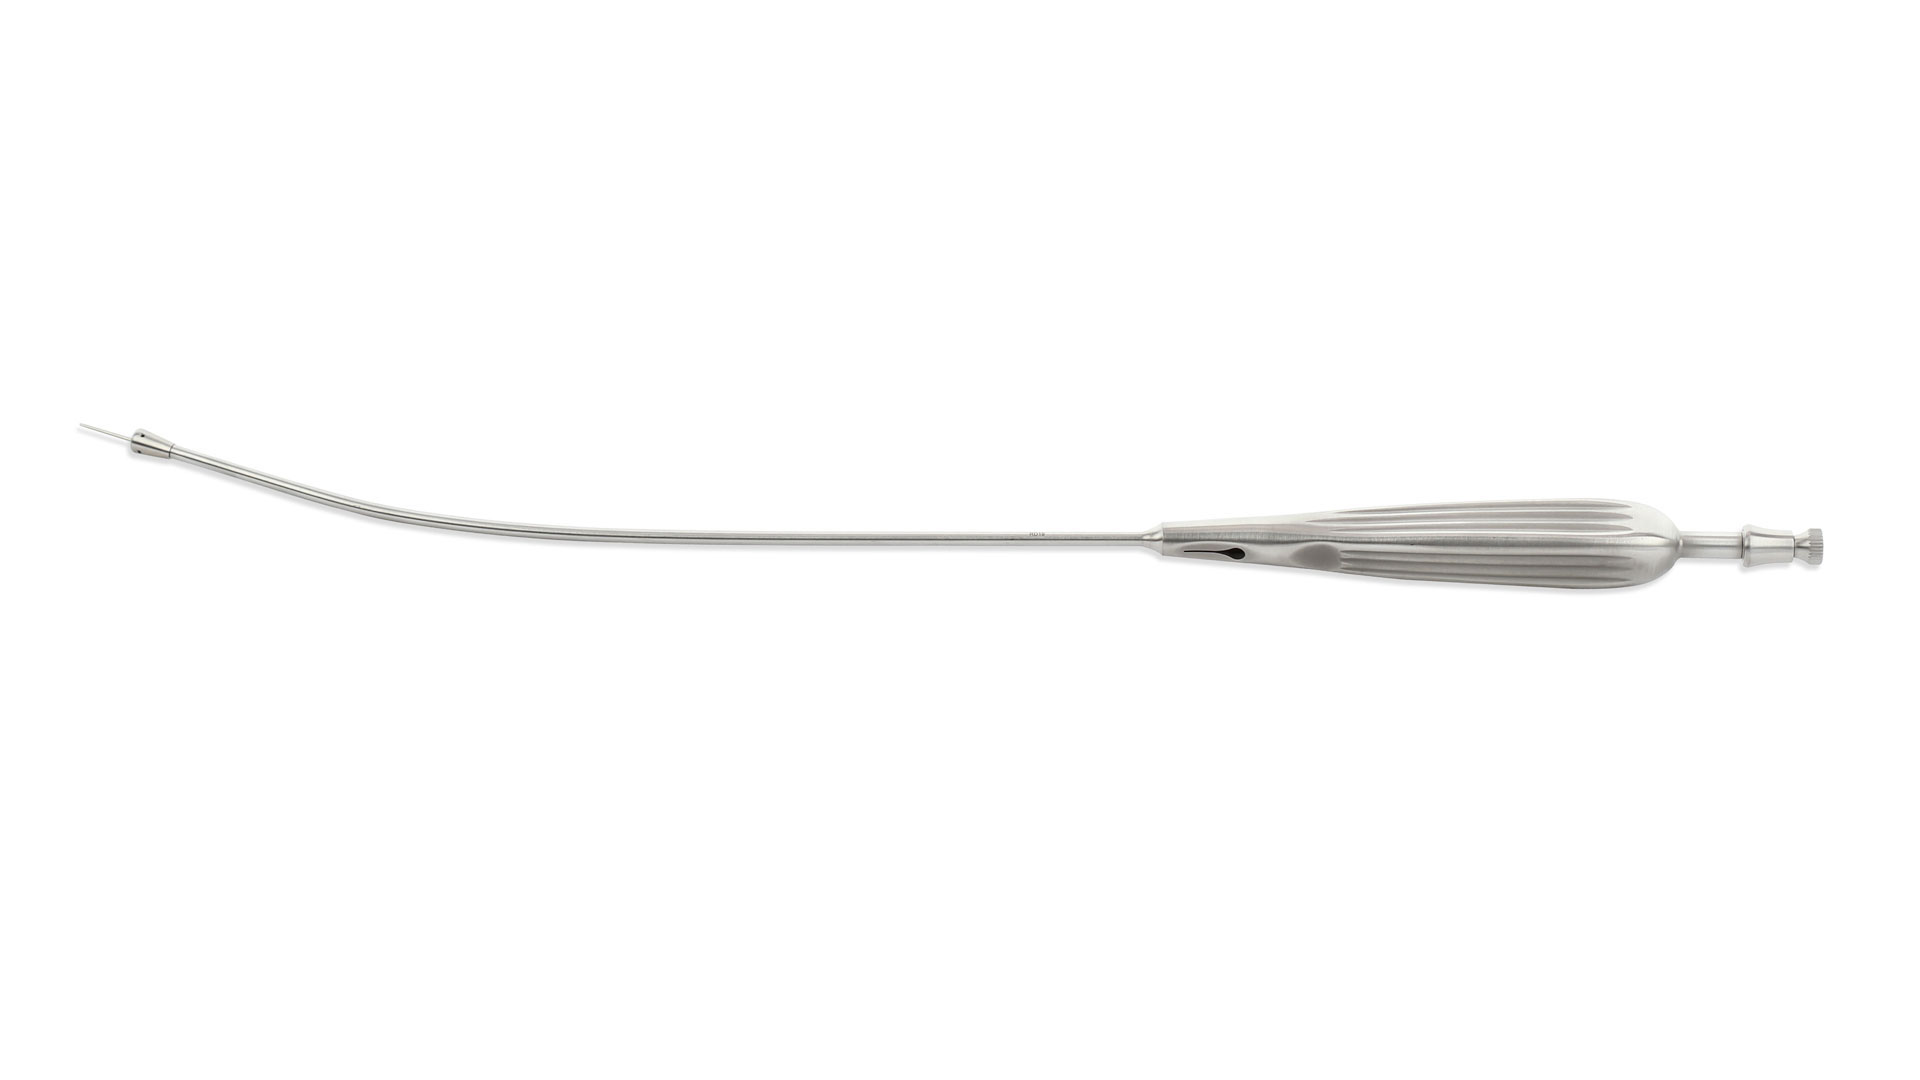 Suction Instrument - Curved 3.2mm tube